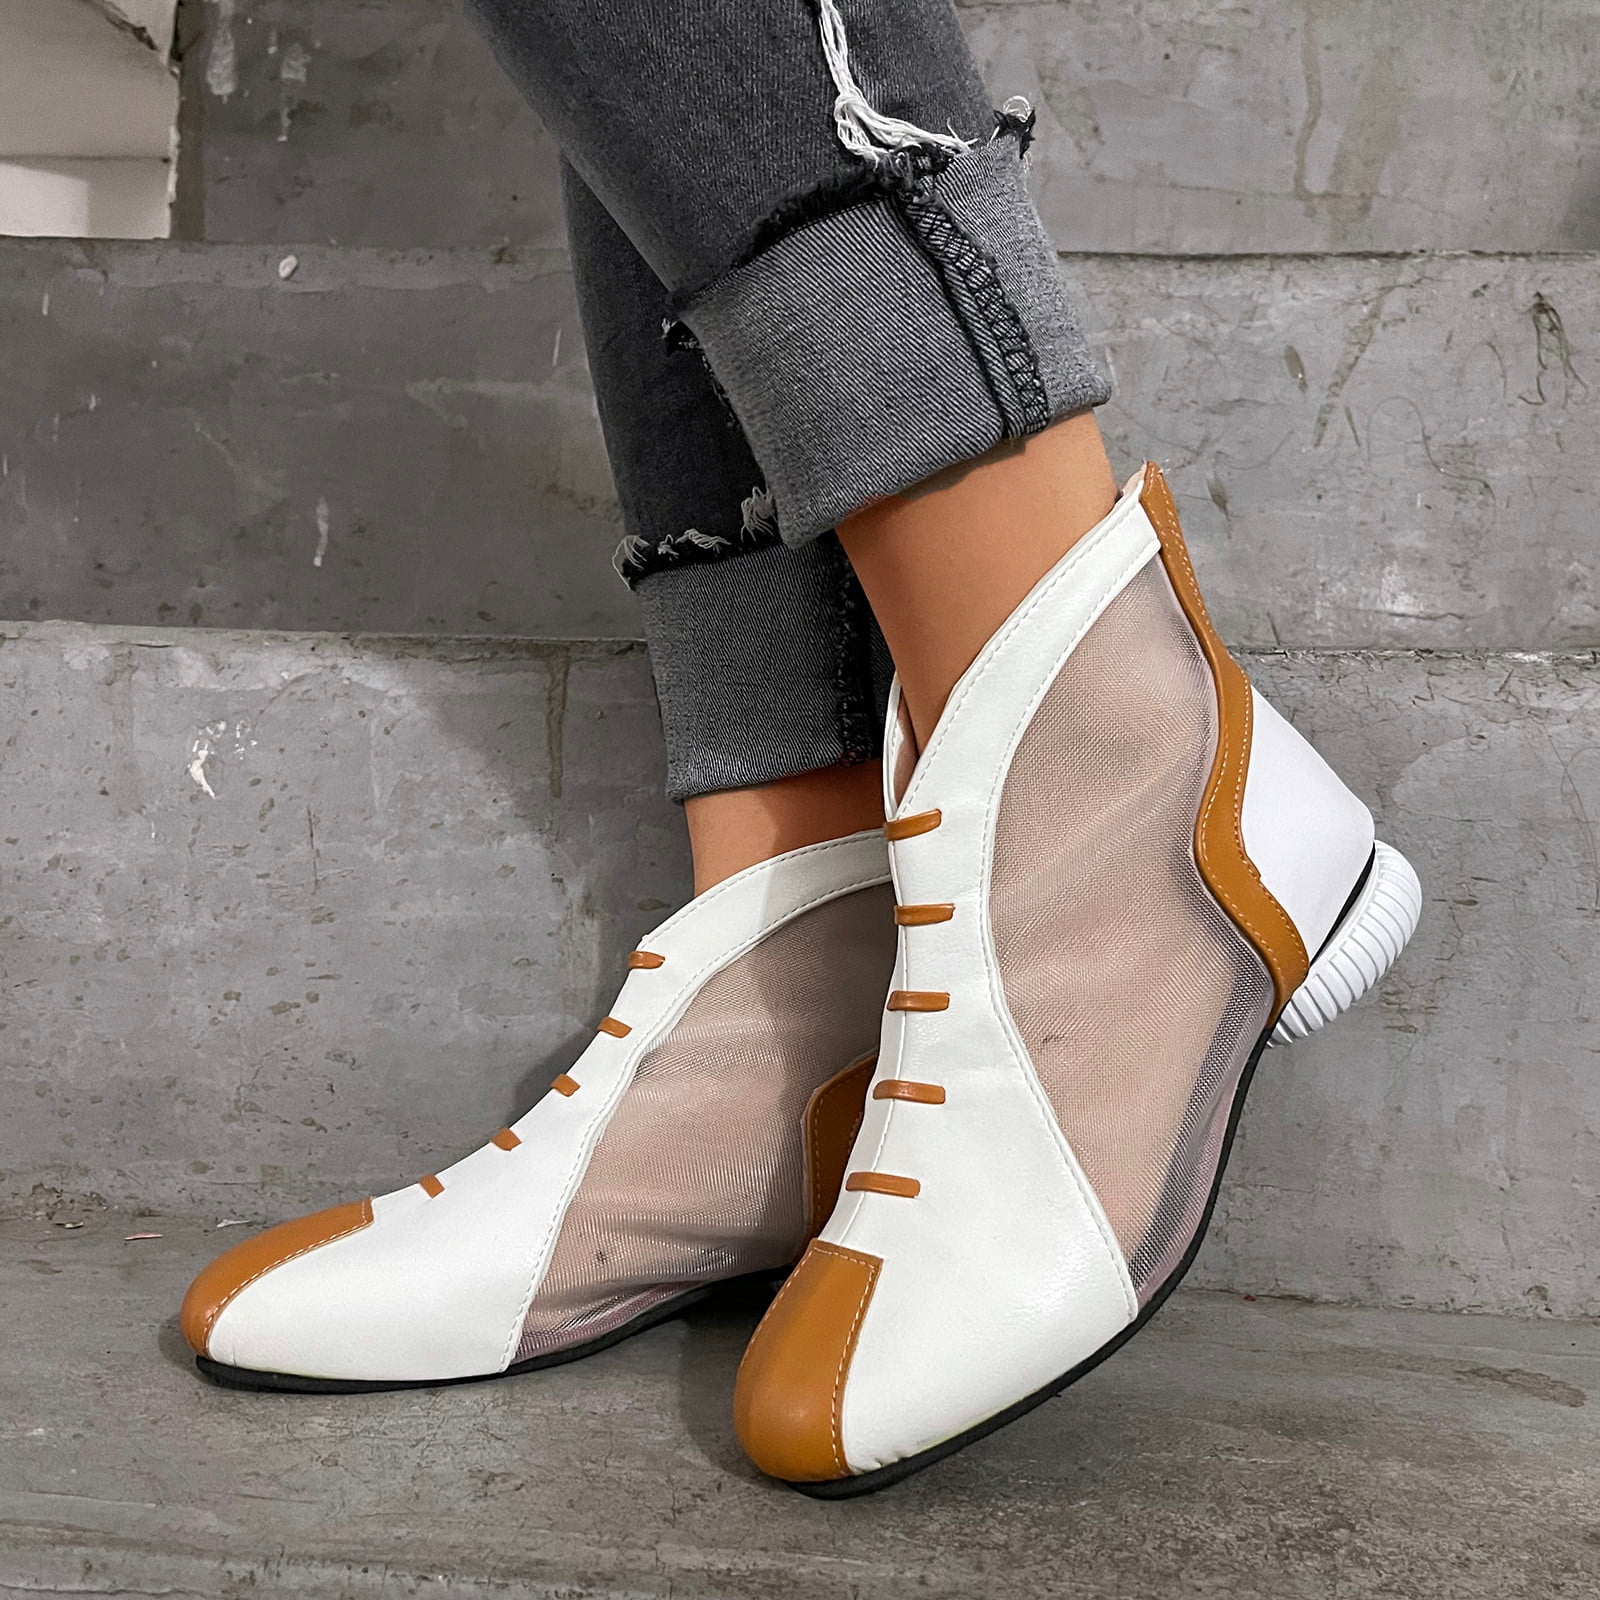 Women's Shoes Flat-heeled Hollow Mesh Single Boots  Round-toed Summer Sandals